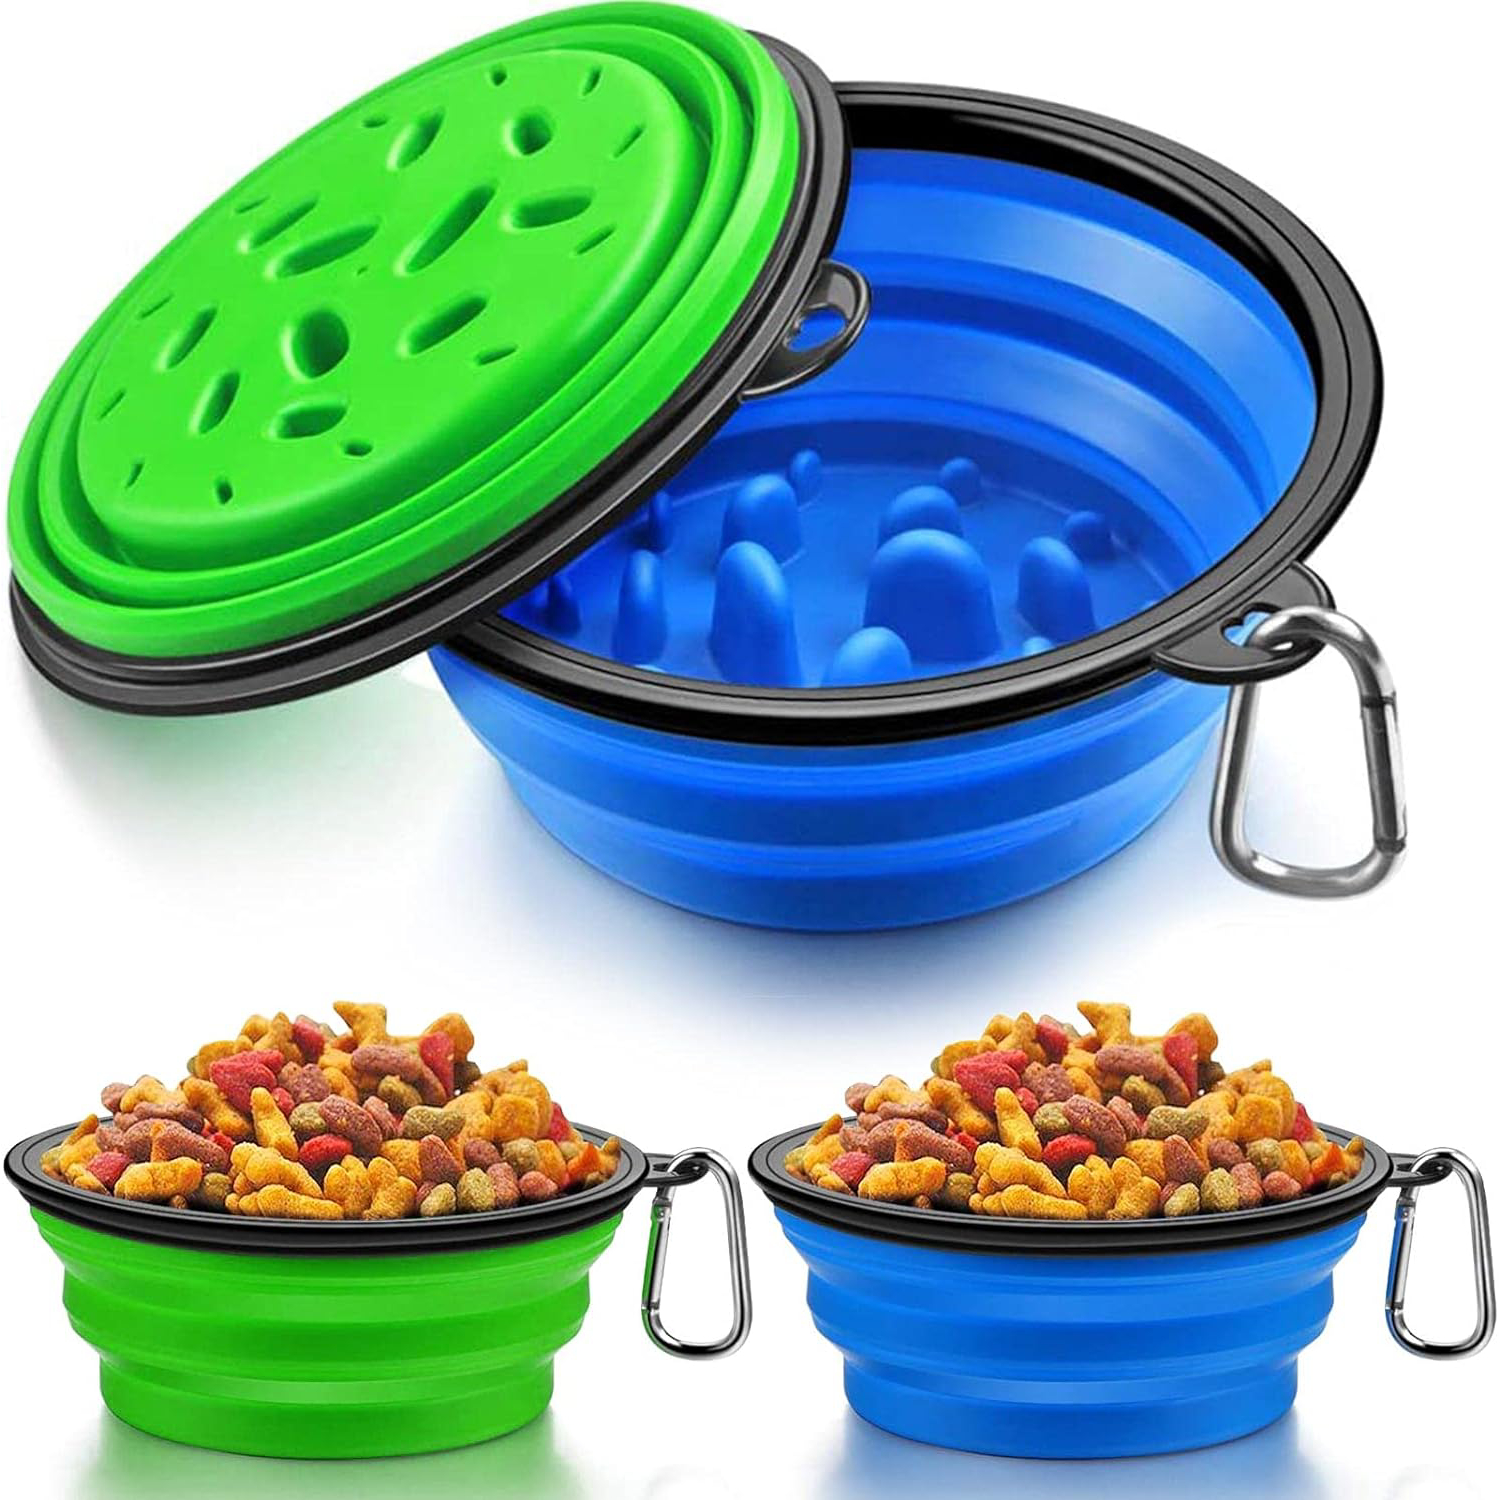 Collapsible Dog Bowl, Collapsible Dog Water Bowls Portable Pet Feeding Watering Dish for Cats Walking Parking Traveling with Carabiners New